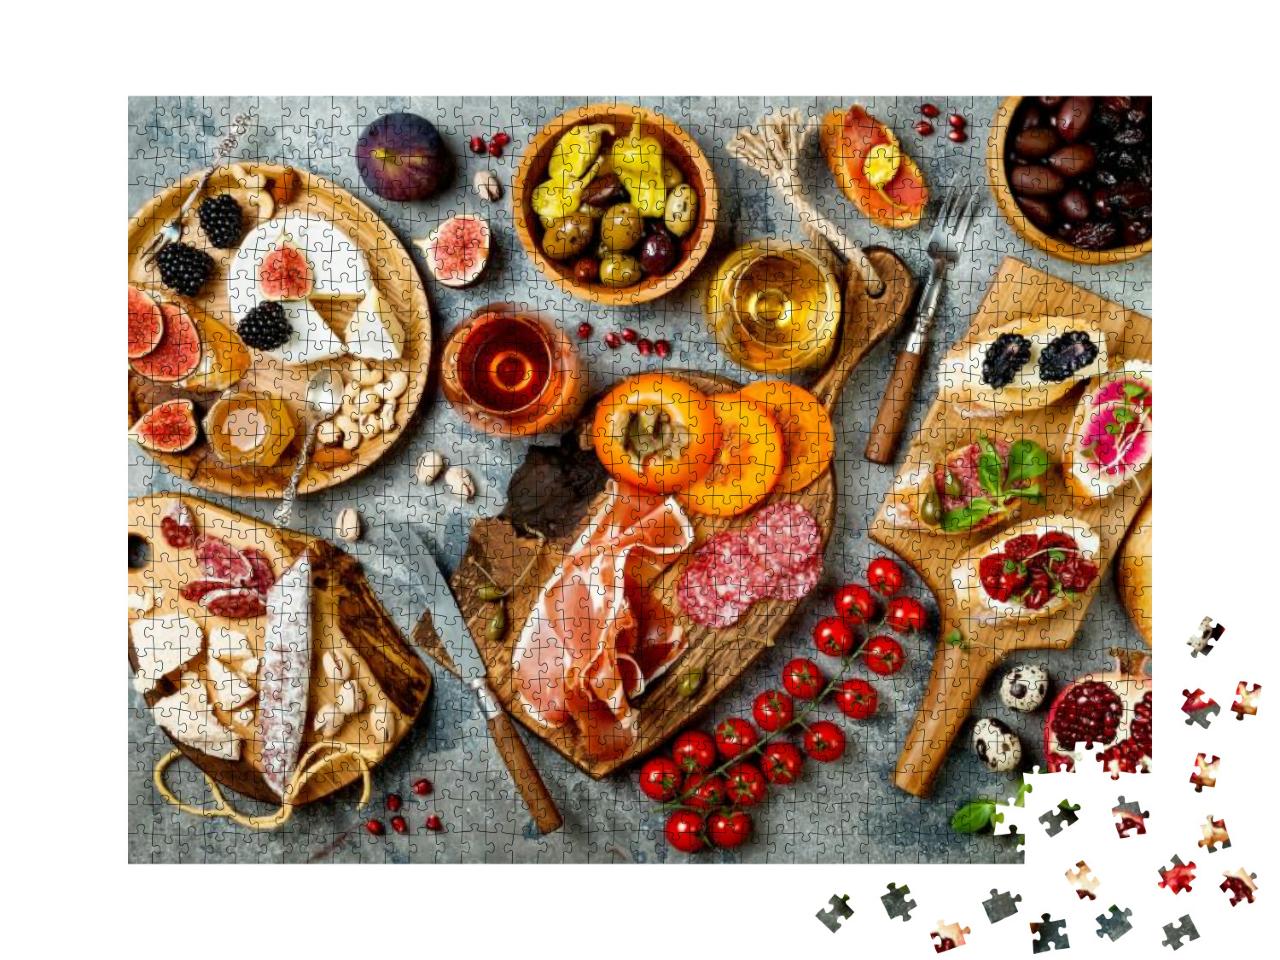 Appetizers Table with Italian Antipasti Snacks & Wine in... Jigsaw Puzzle with 1000 pieces